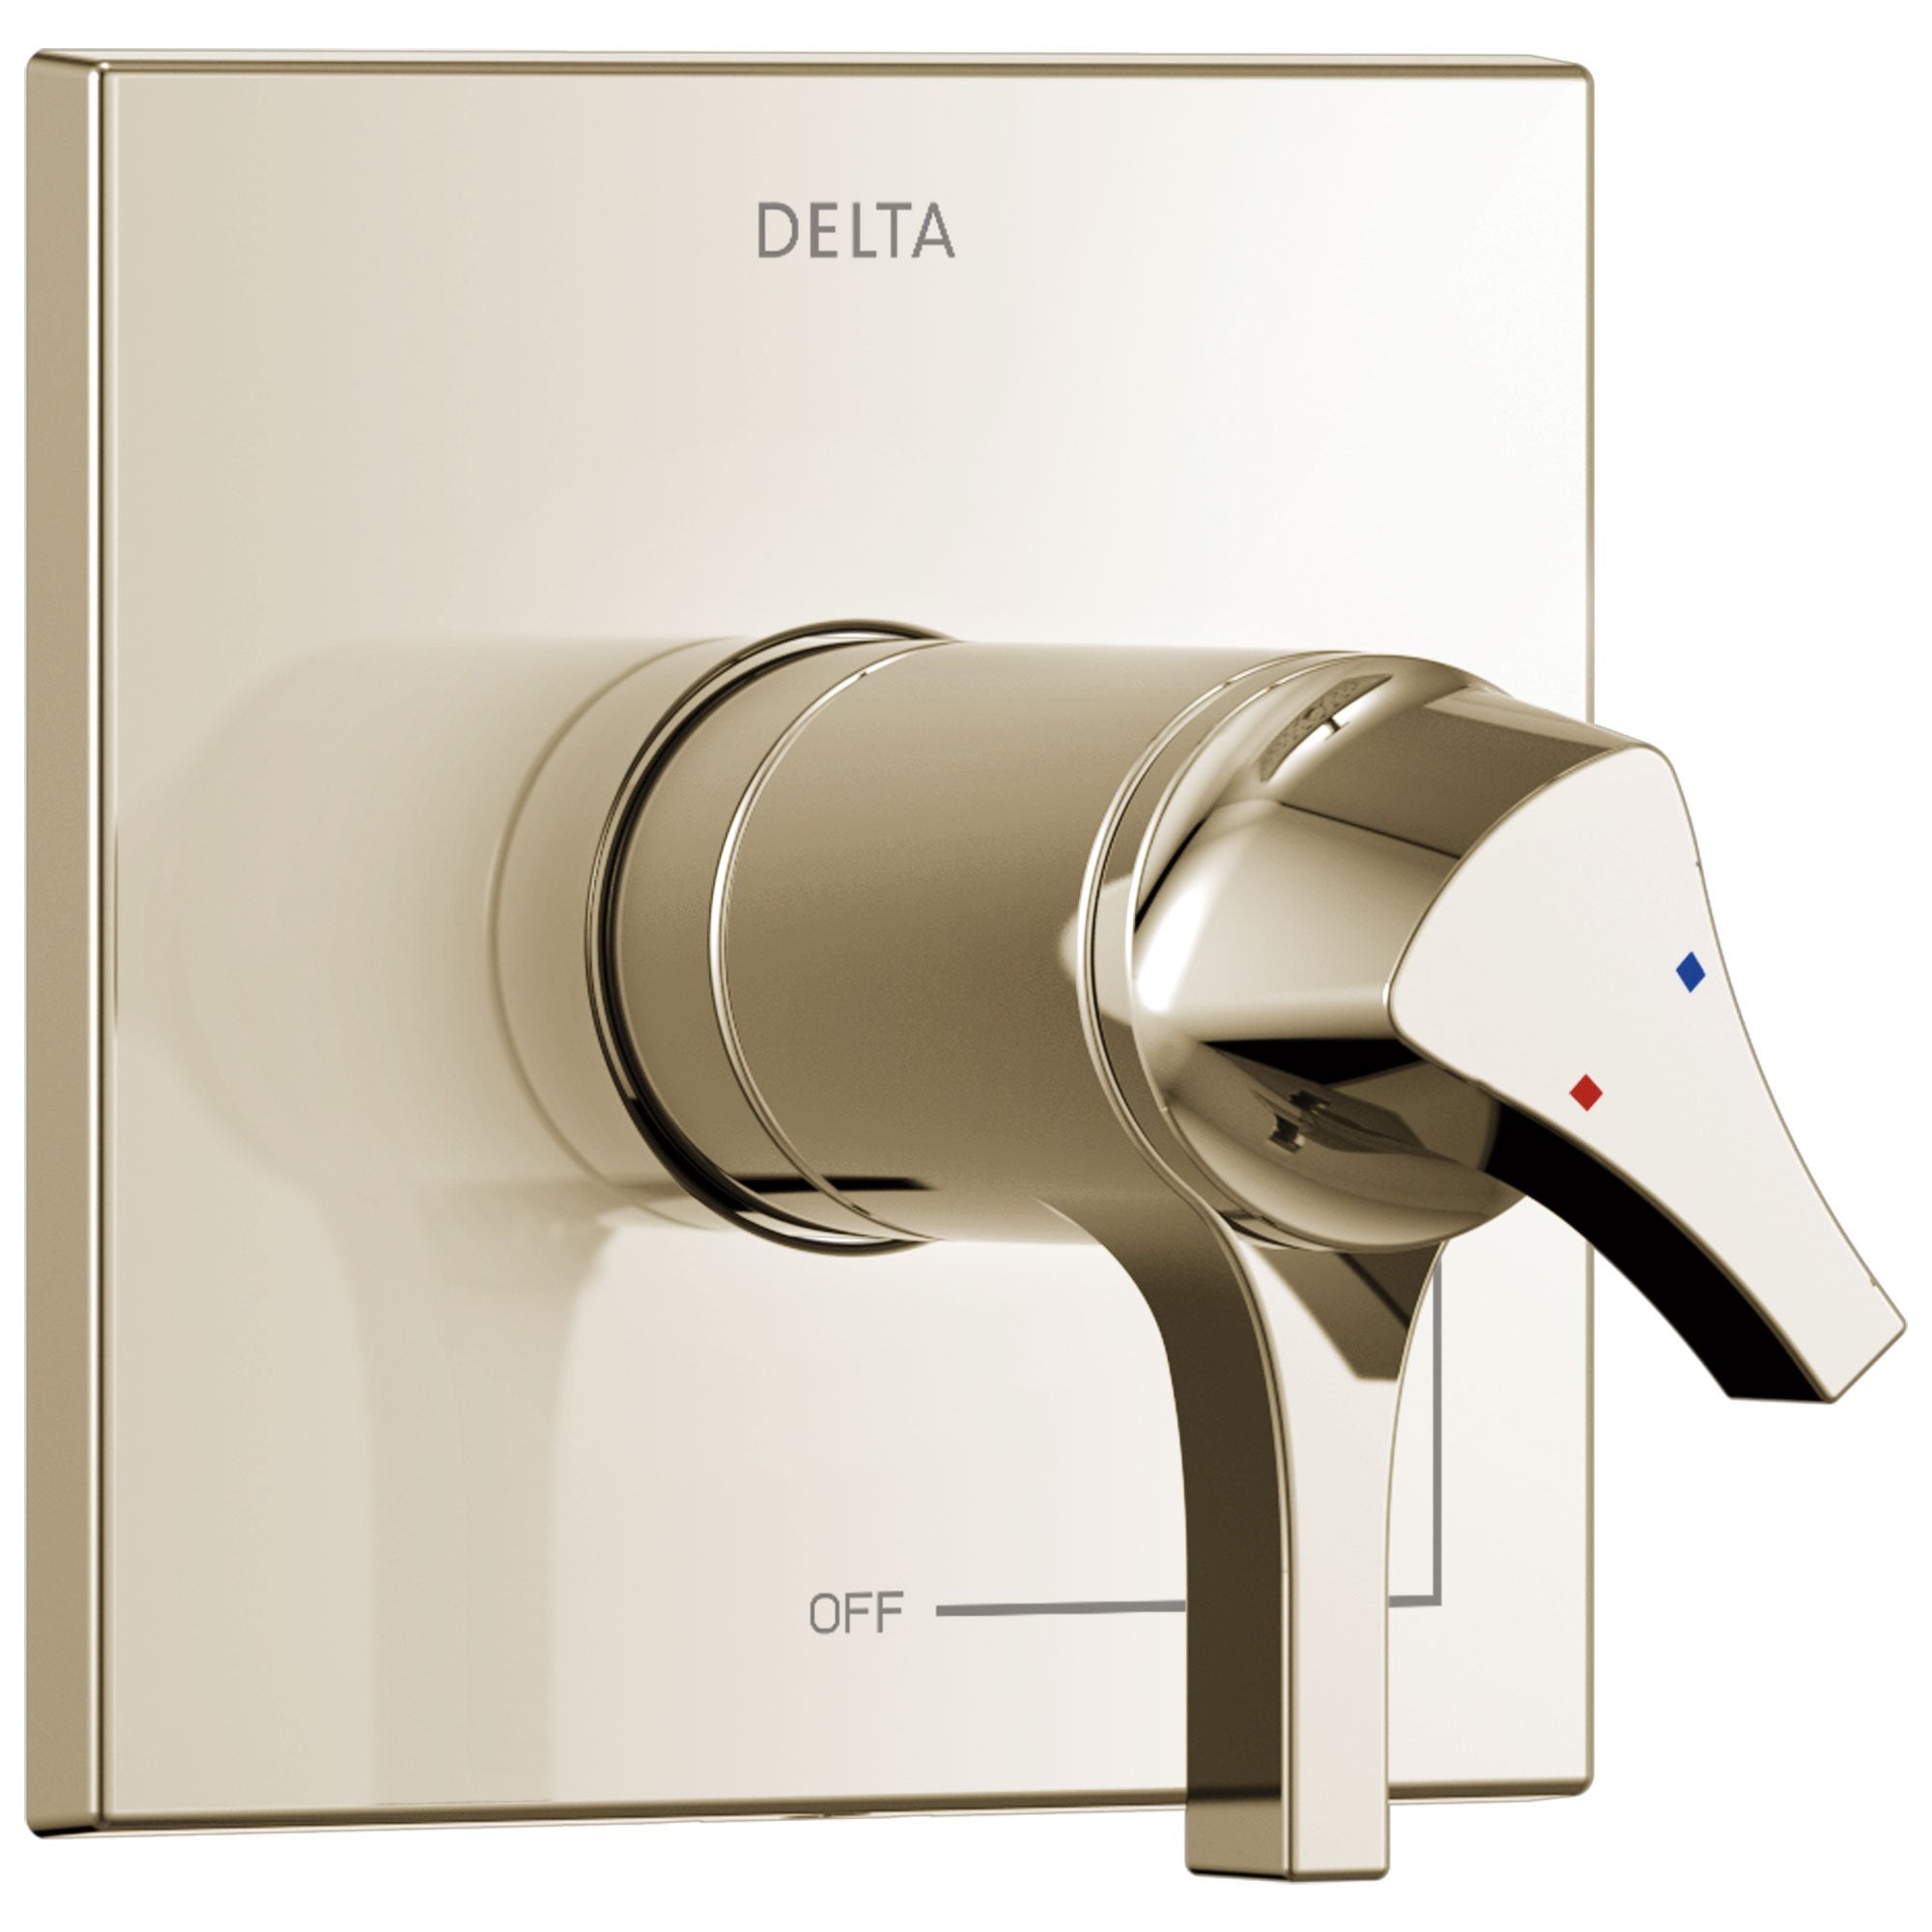 Delta Zura Collection Polished Nickel TempAssure 17T Dual Temperature and Pressure Shower Faucet Control Handle Includes Rough-in Valve without Stops D1944V